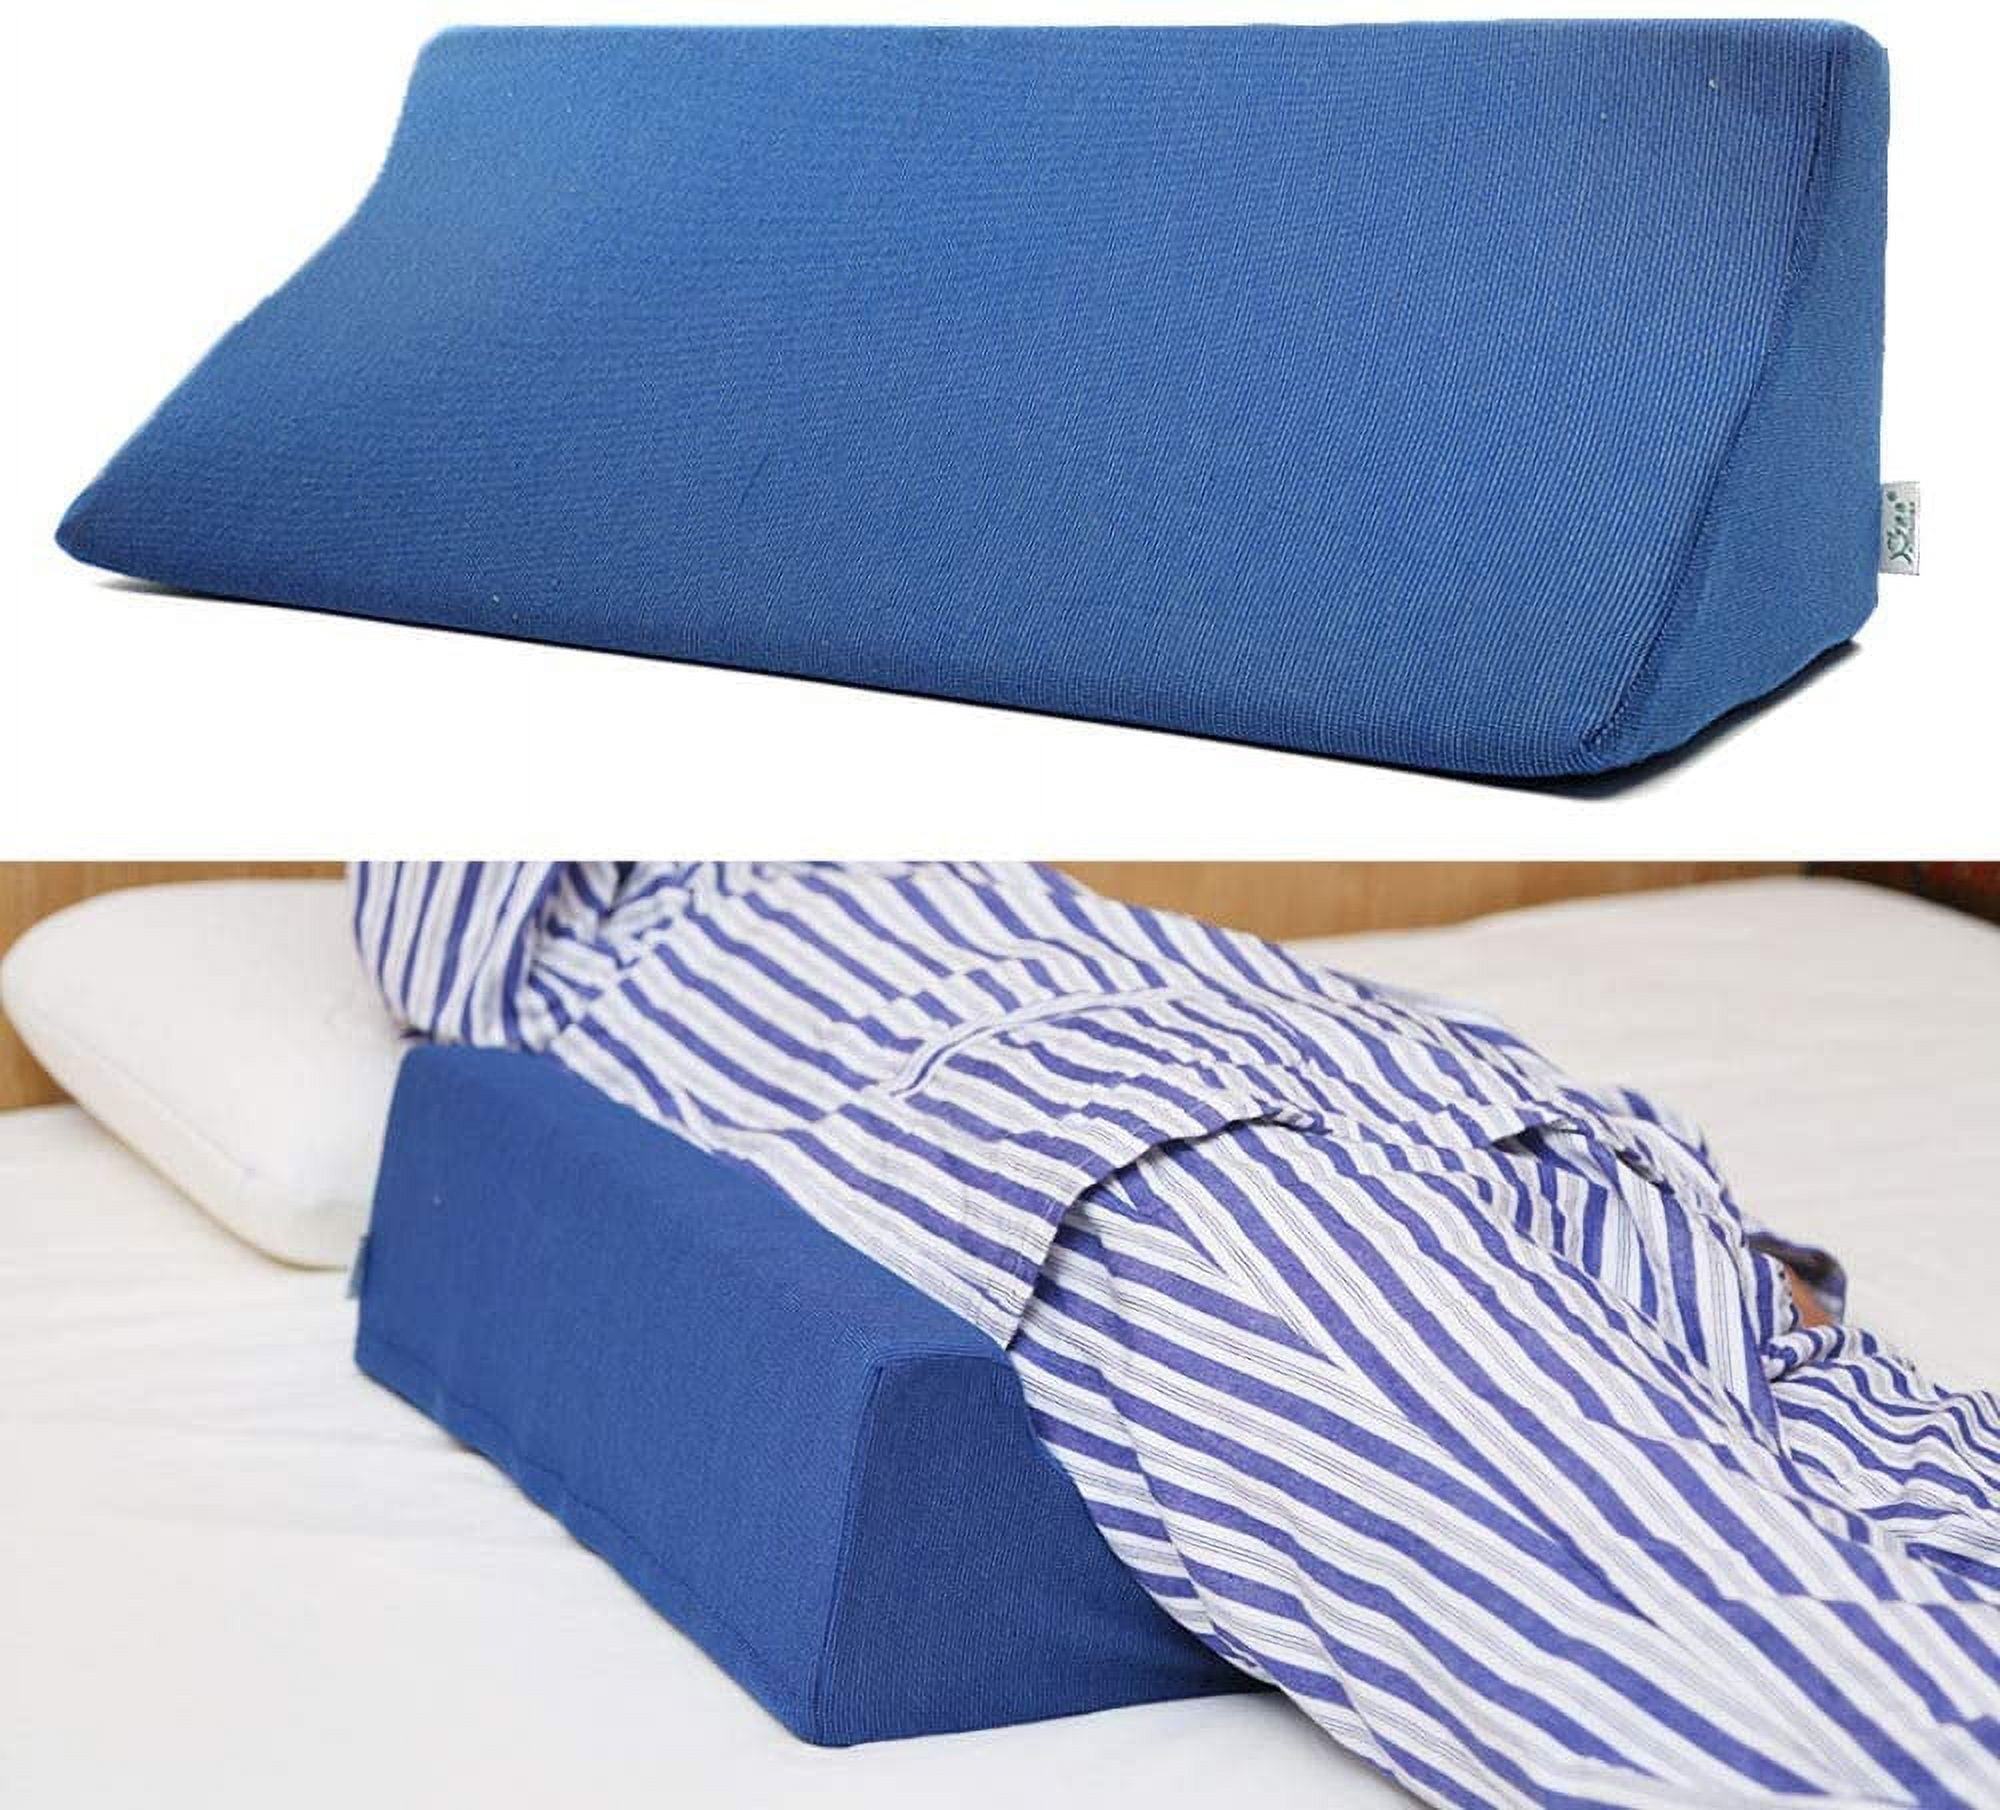 Lunderg Bedsore Pillow Positioning Wedge - with 2 Non-Slip Pillowcases & Adjustable Slope - Pressure Ulcer Cushion for Bed Sore Prevention - Stay on